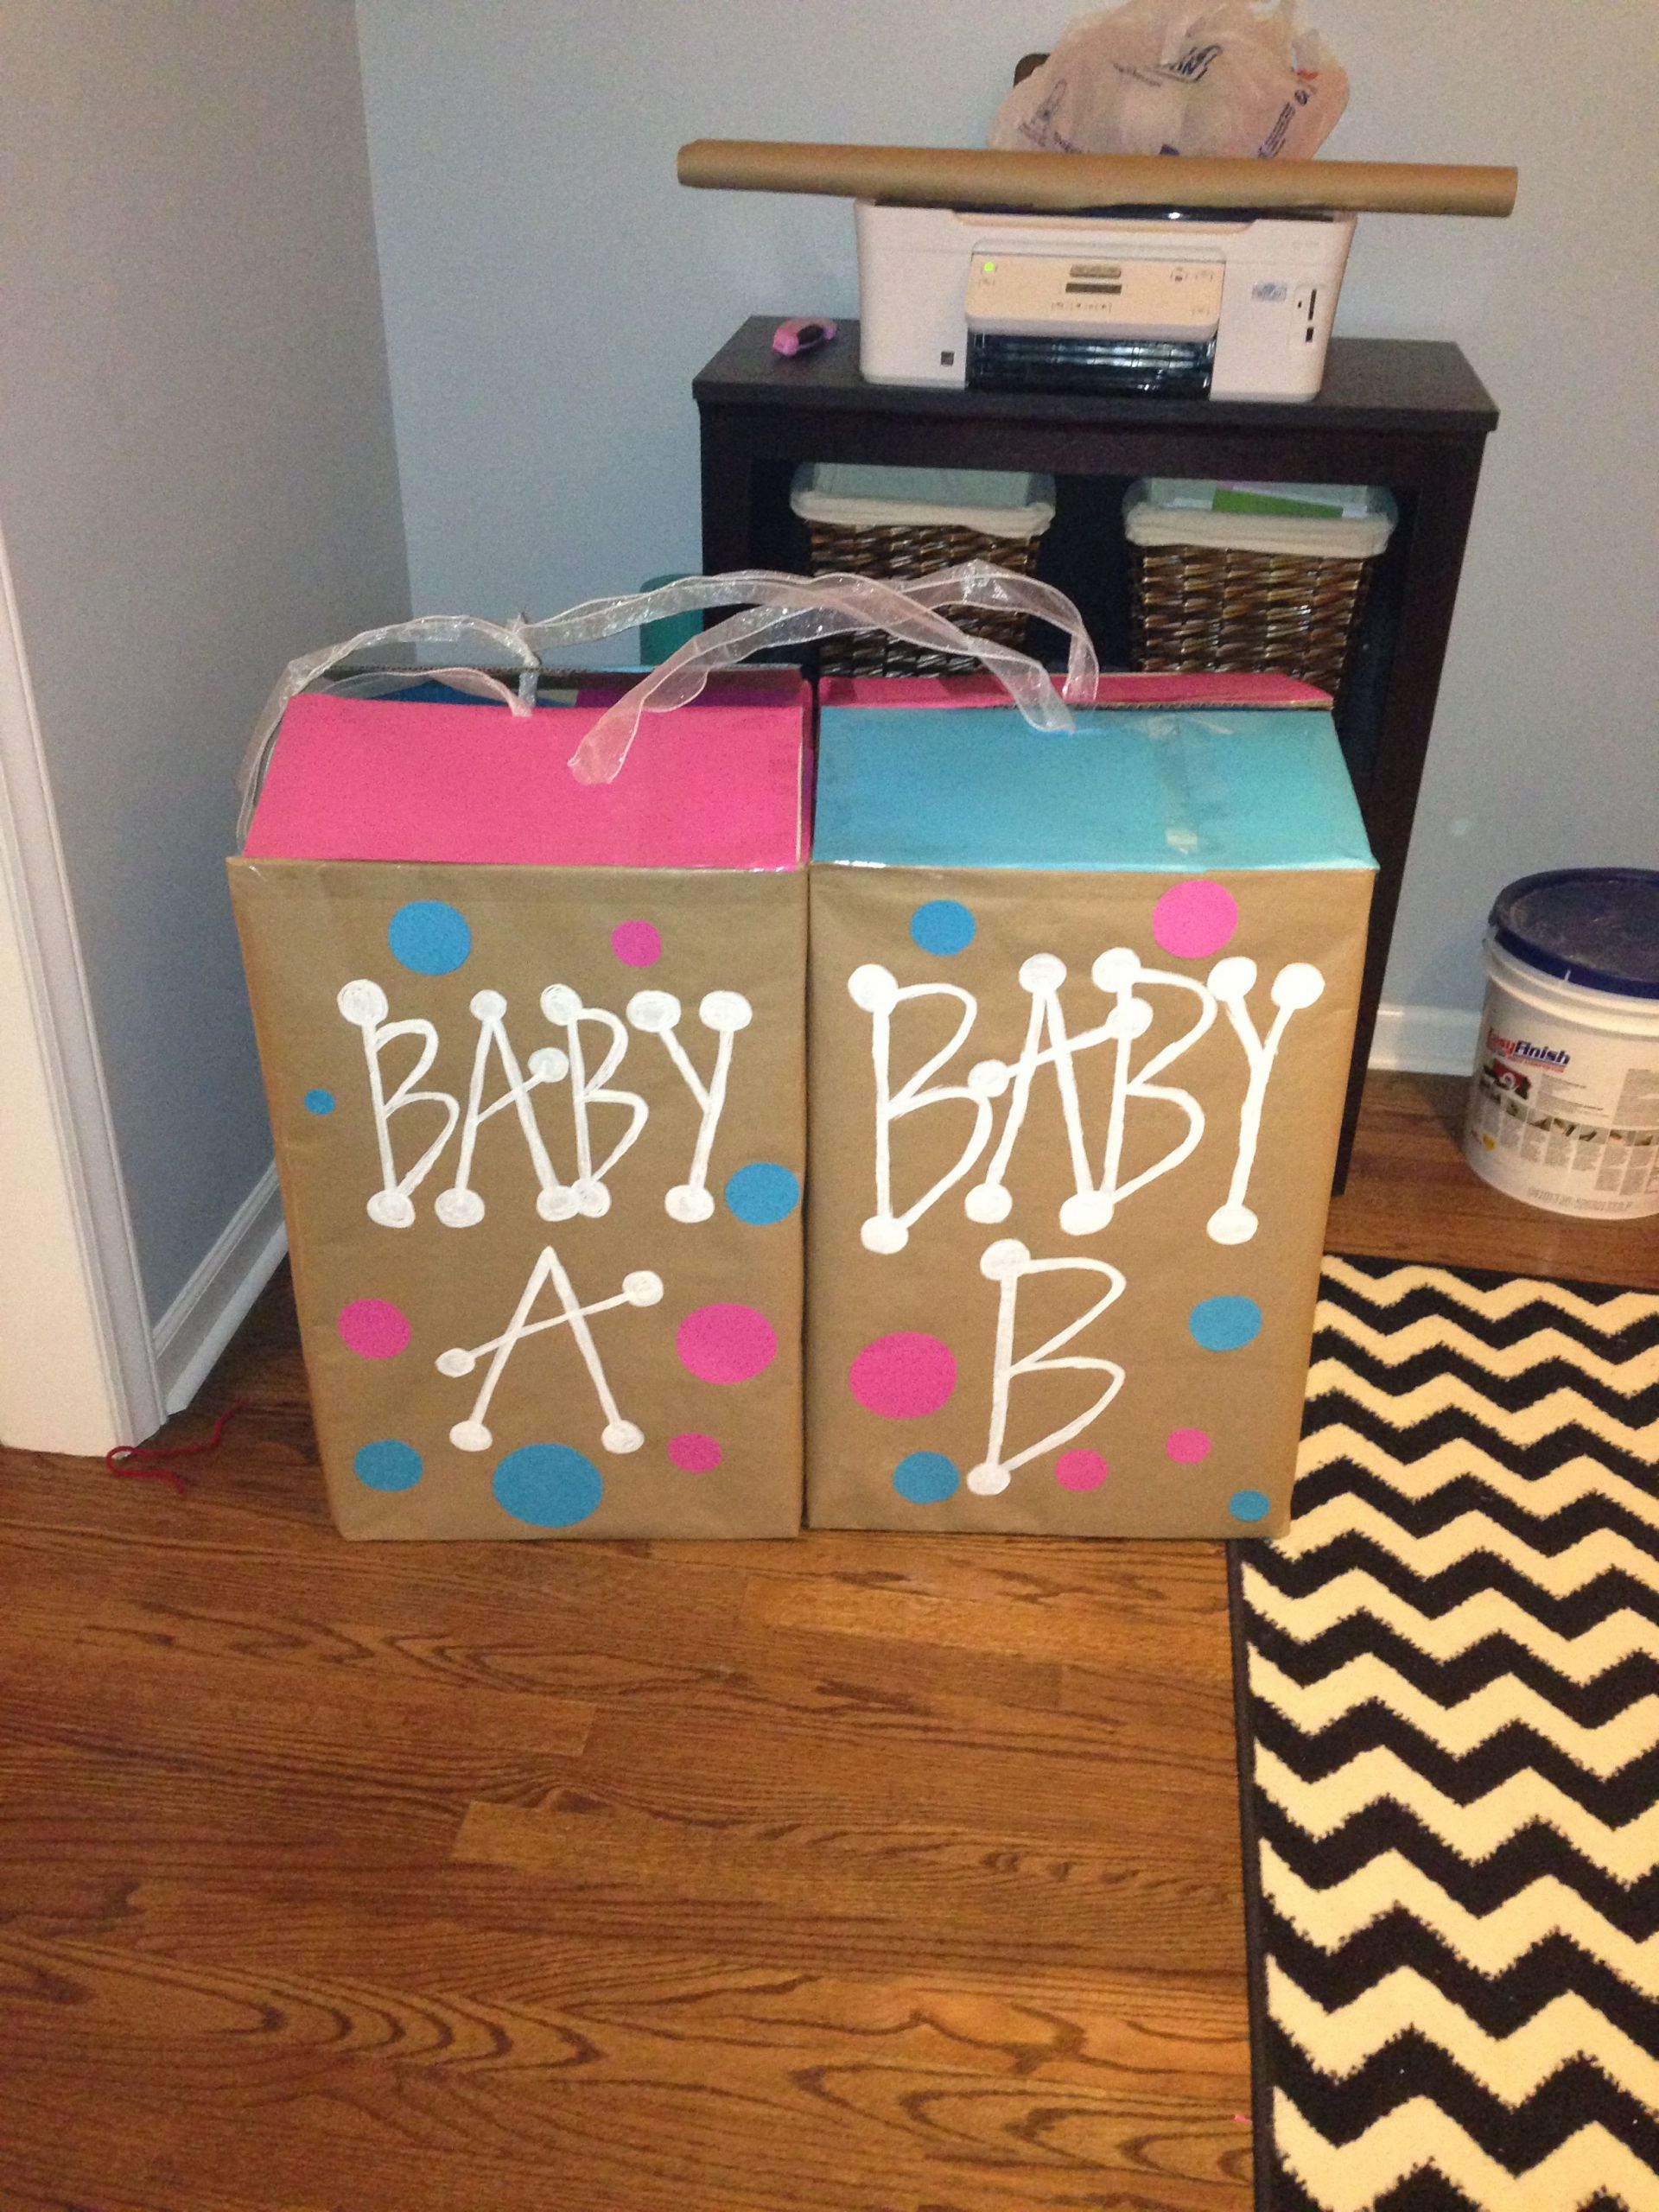 Twin Gender Reveal Party Ideas
 Baby a and baby b gender reveal boxes For twins